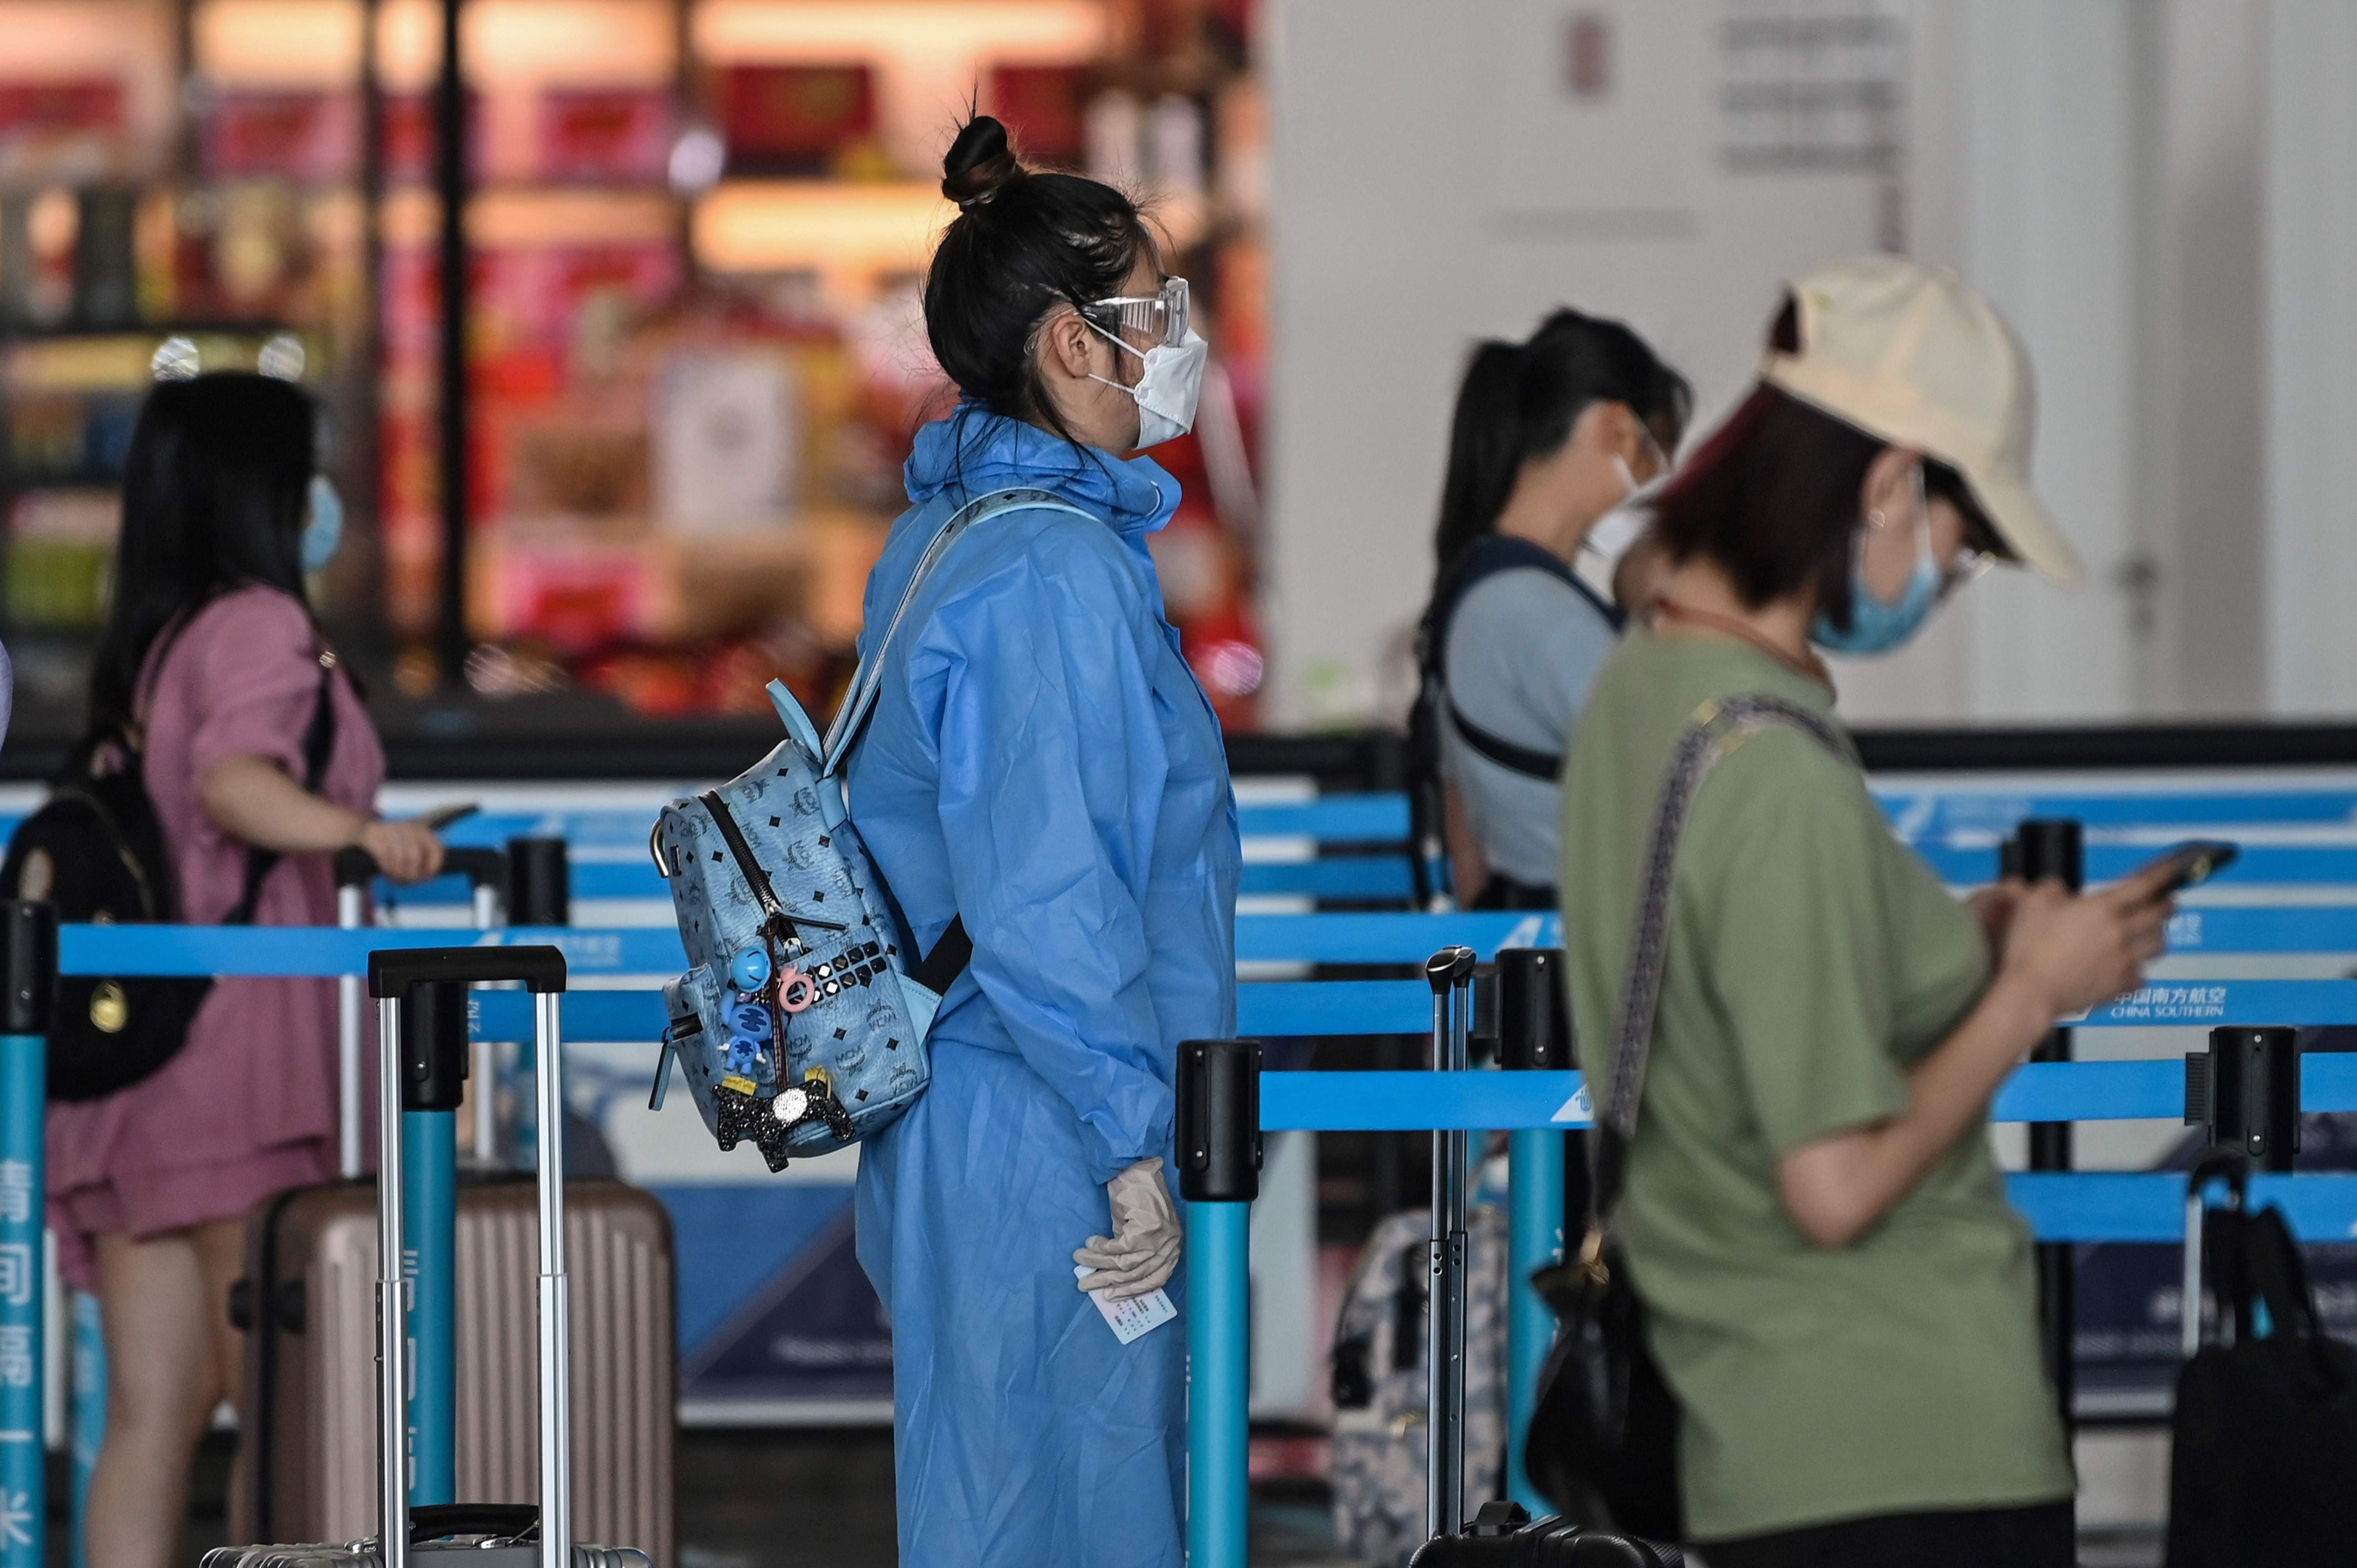 A passenger wearing a protective gear and a face mask waits in line at an airline counter at Tianhe airport in Wuhan. (Credit: AFP Photo)